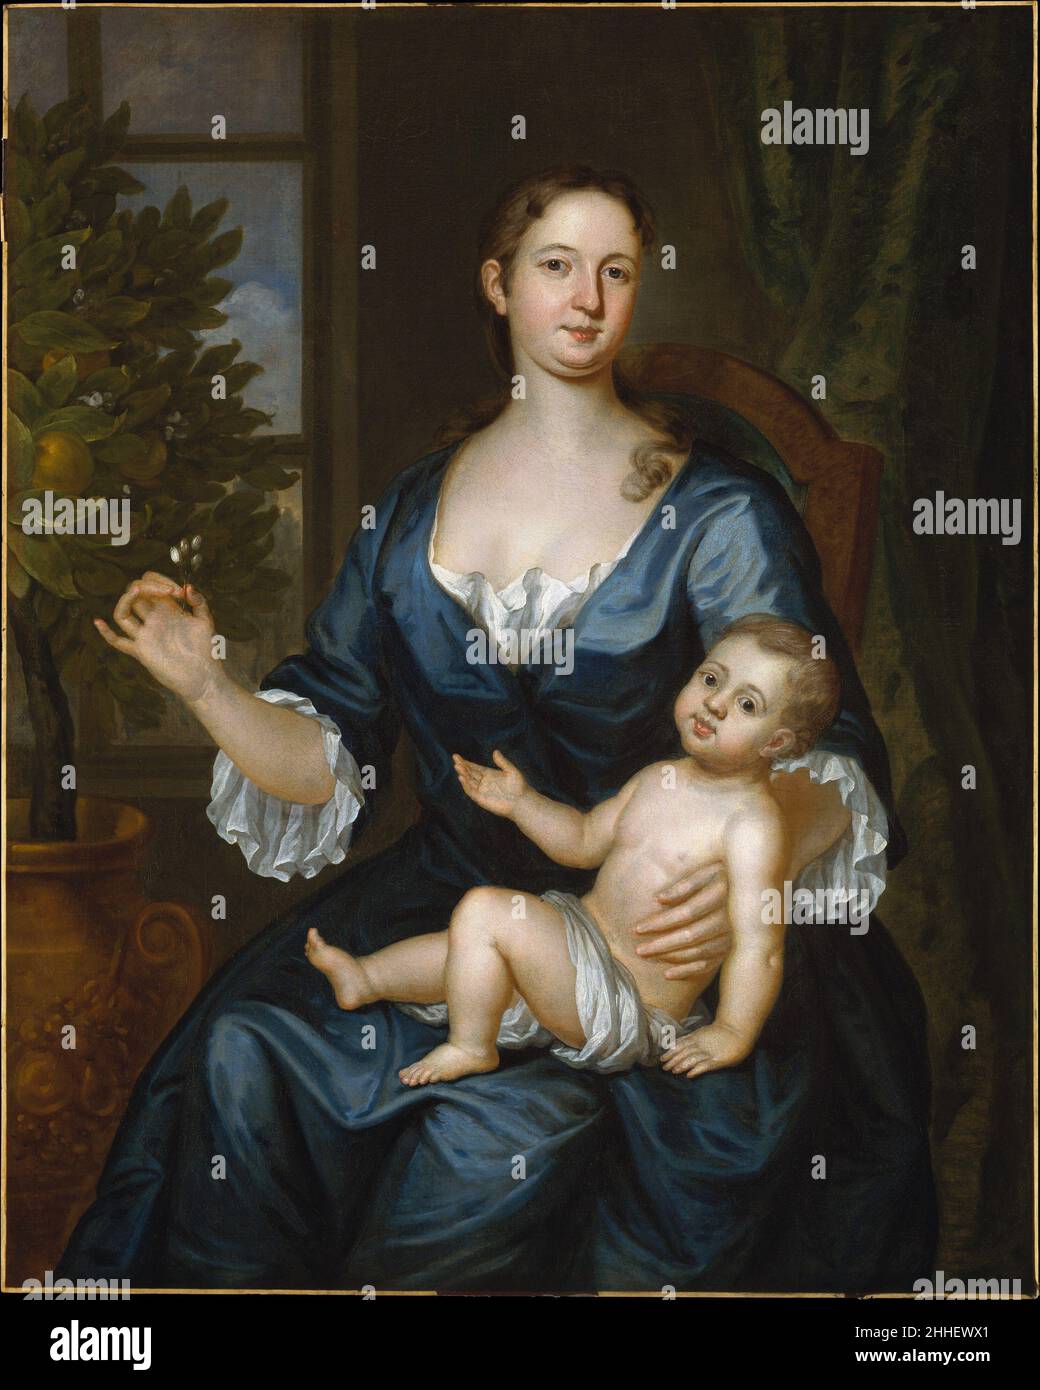 Mrs. Francis Brinley and Her Son Francis 1729 John Smibert American, Scottish Born Deborah Lyde, Mrs. Francis Brinley (1698–1761) was the daughter of Edward and Catherine Lyde and the granddaughter of Judge Nathaniel Byfield (see portrait by Smibert, 24.109.87). When she married Francis Brinley in 1718, she was a woman of wealth and social prominence. An entry in Smibert's notebook dated May 1729 identifies the infant as the Brinley's son Francis (1729–1816). Mrs. Brinley holds a sprig of orange blossoms, a gesture which may have been taken from an eighteenth-century print by Sir Peter Lely. T Stock Photo